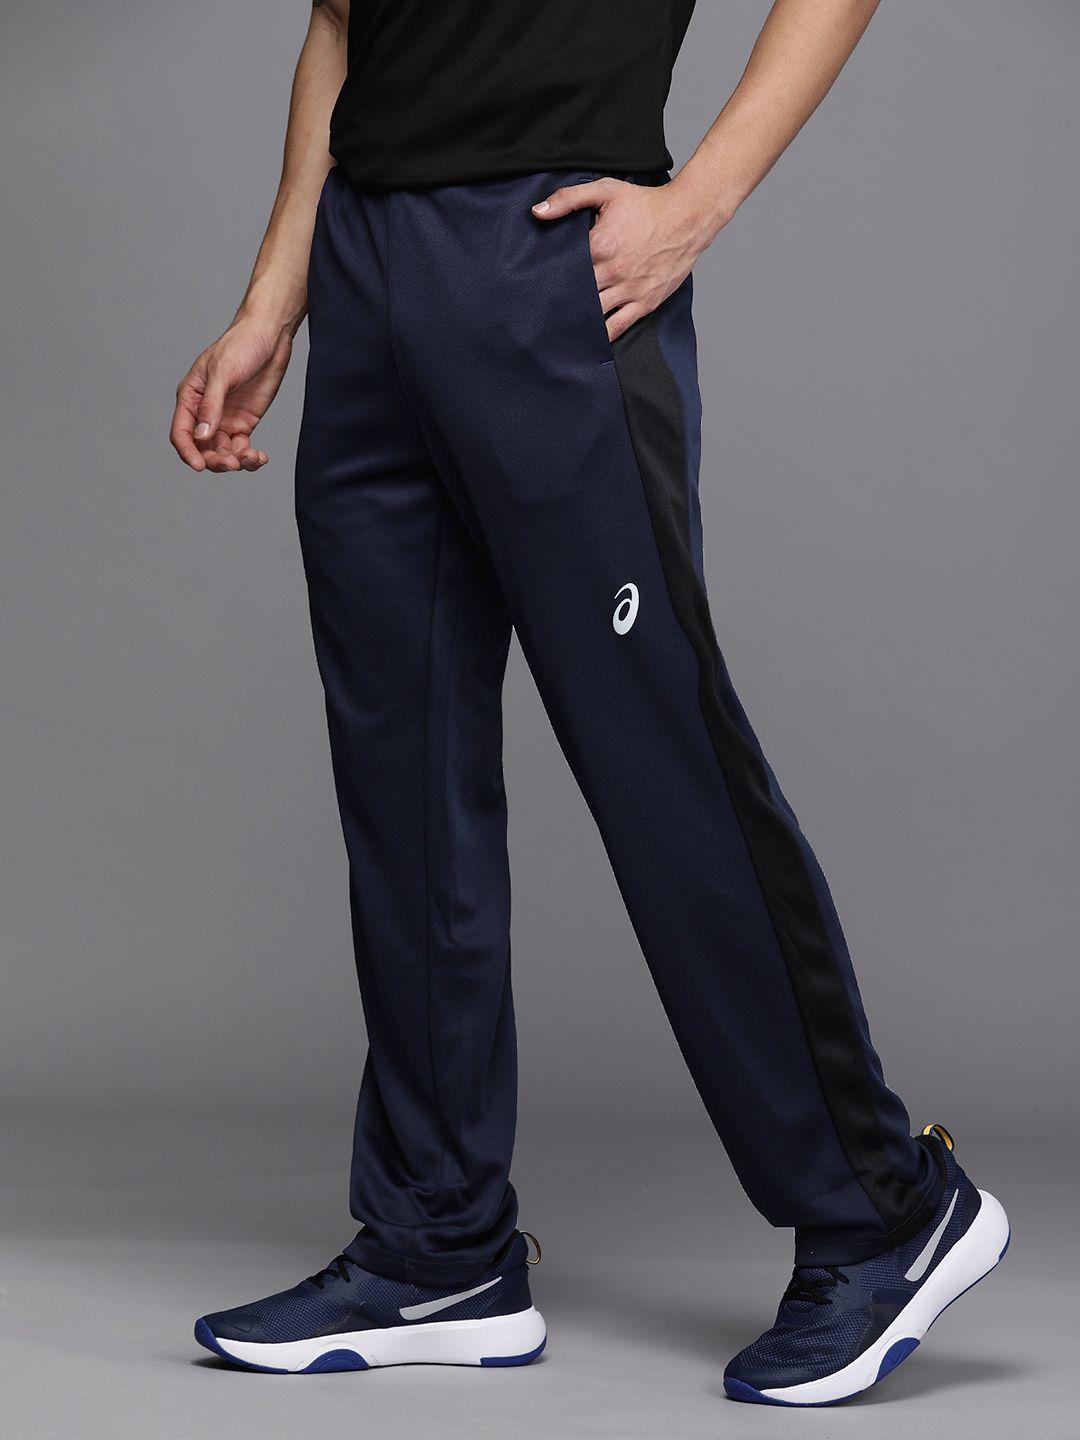 asics men navy blue brand logo printed mid-rise running track pants with side stripes